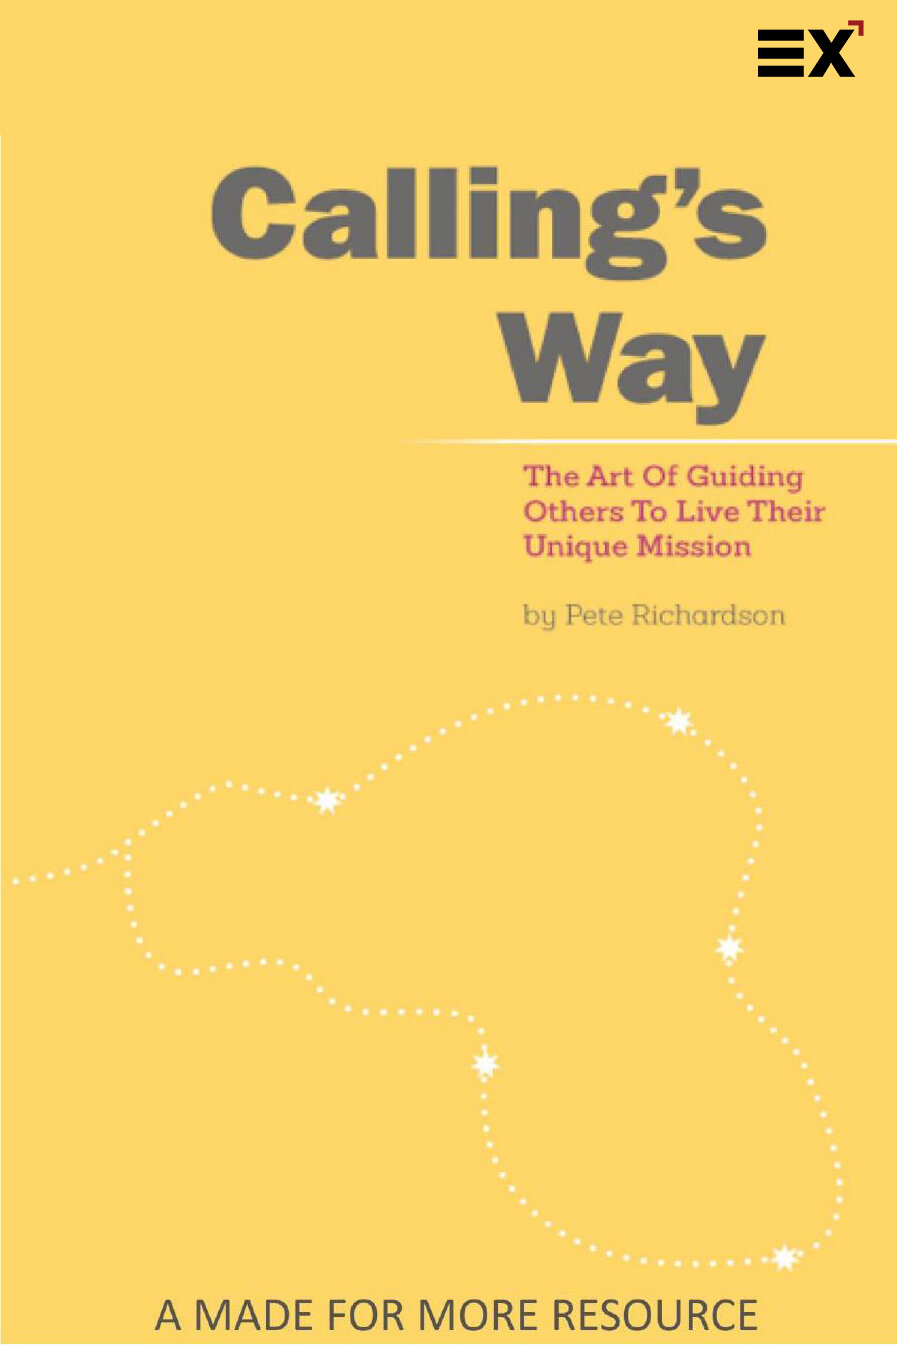 Callings Way: The Art of Guiding Others to Live Their Unique Mission